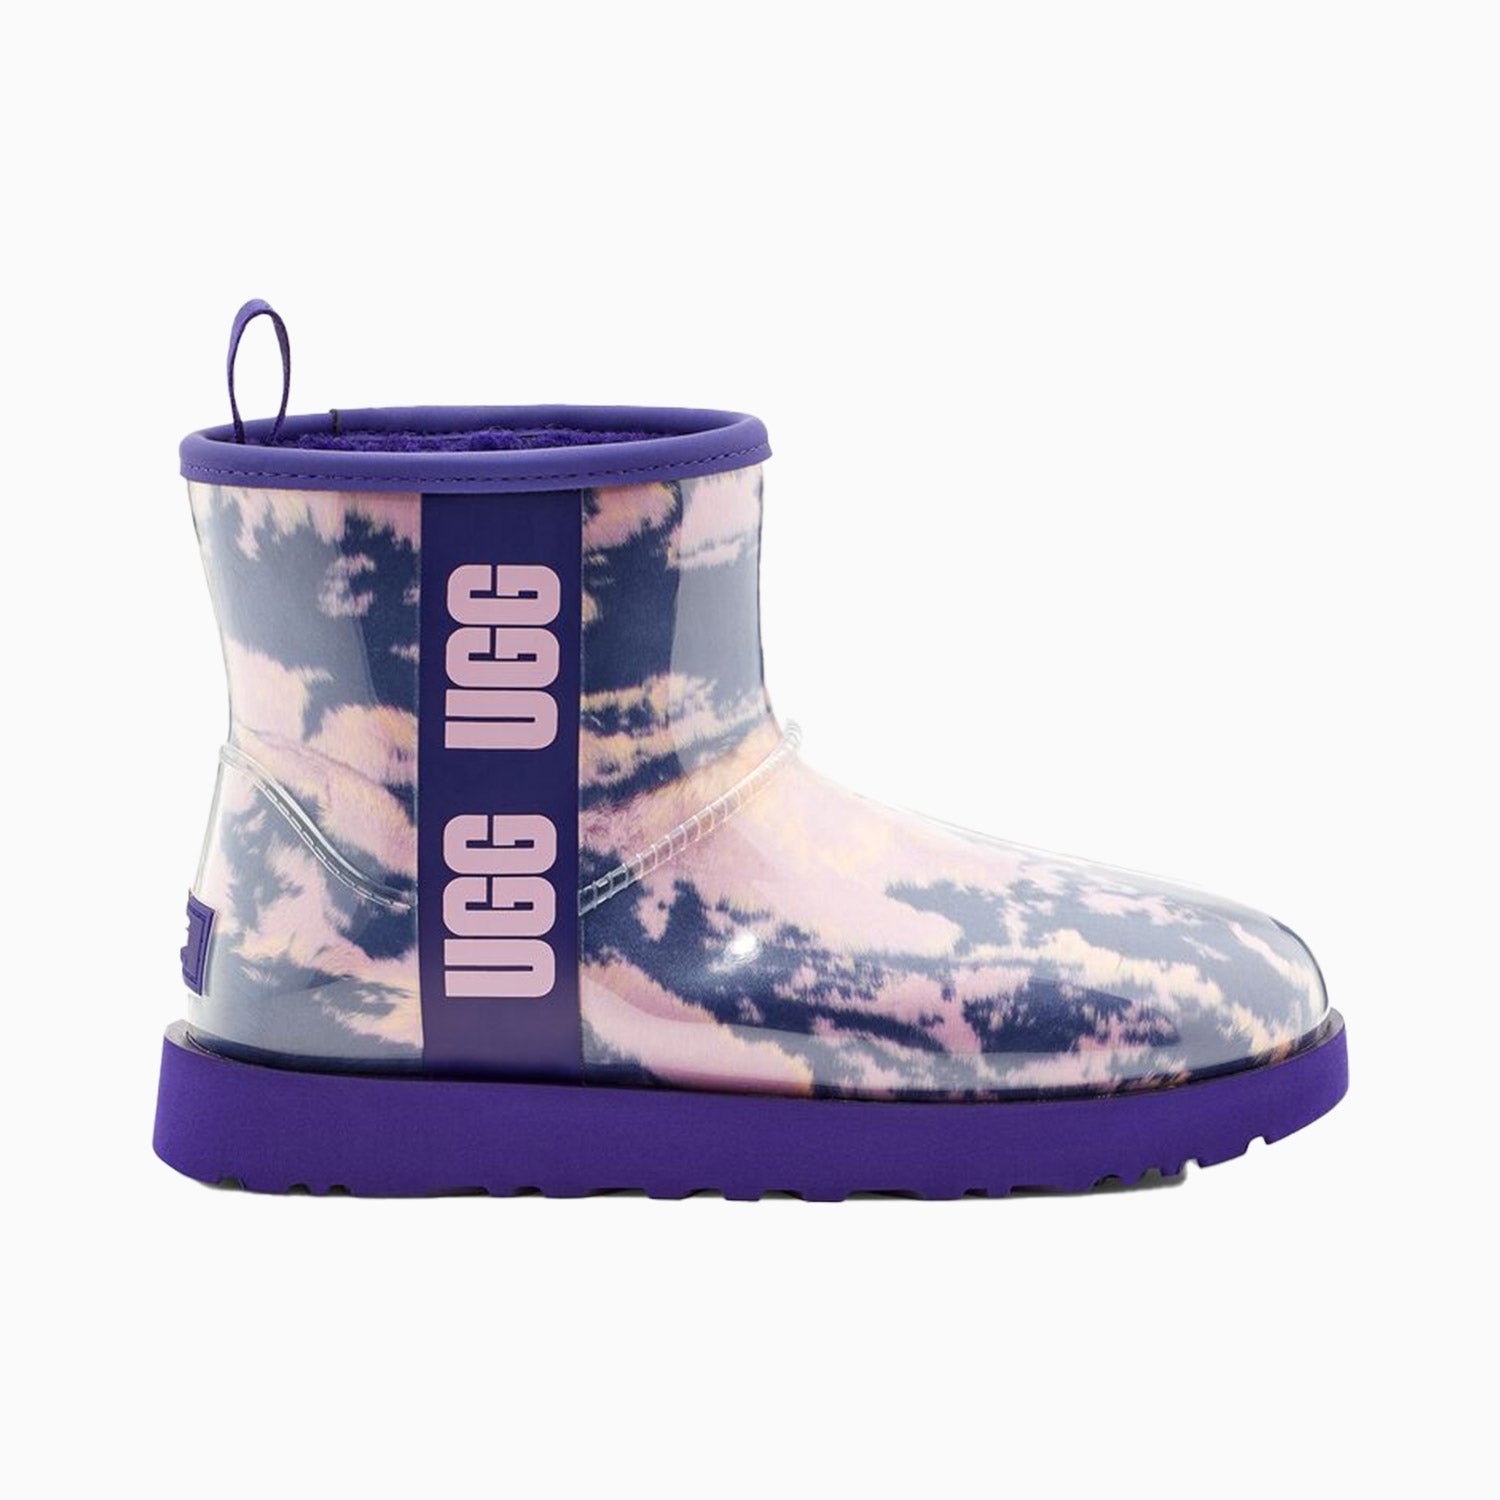 UGG Women's Classic Mini Marble Boot - Color: VIOLET - Tops and Bottoms USA -